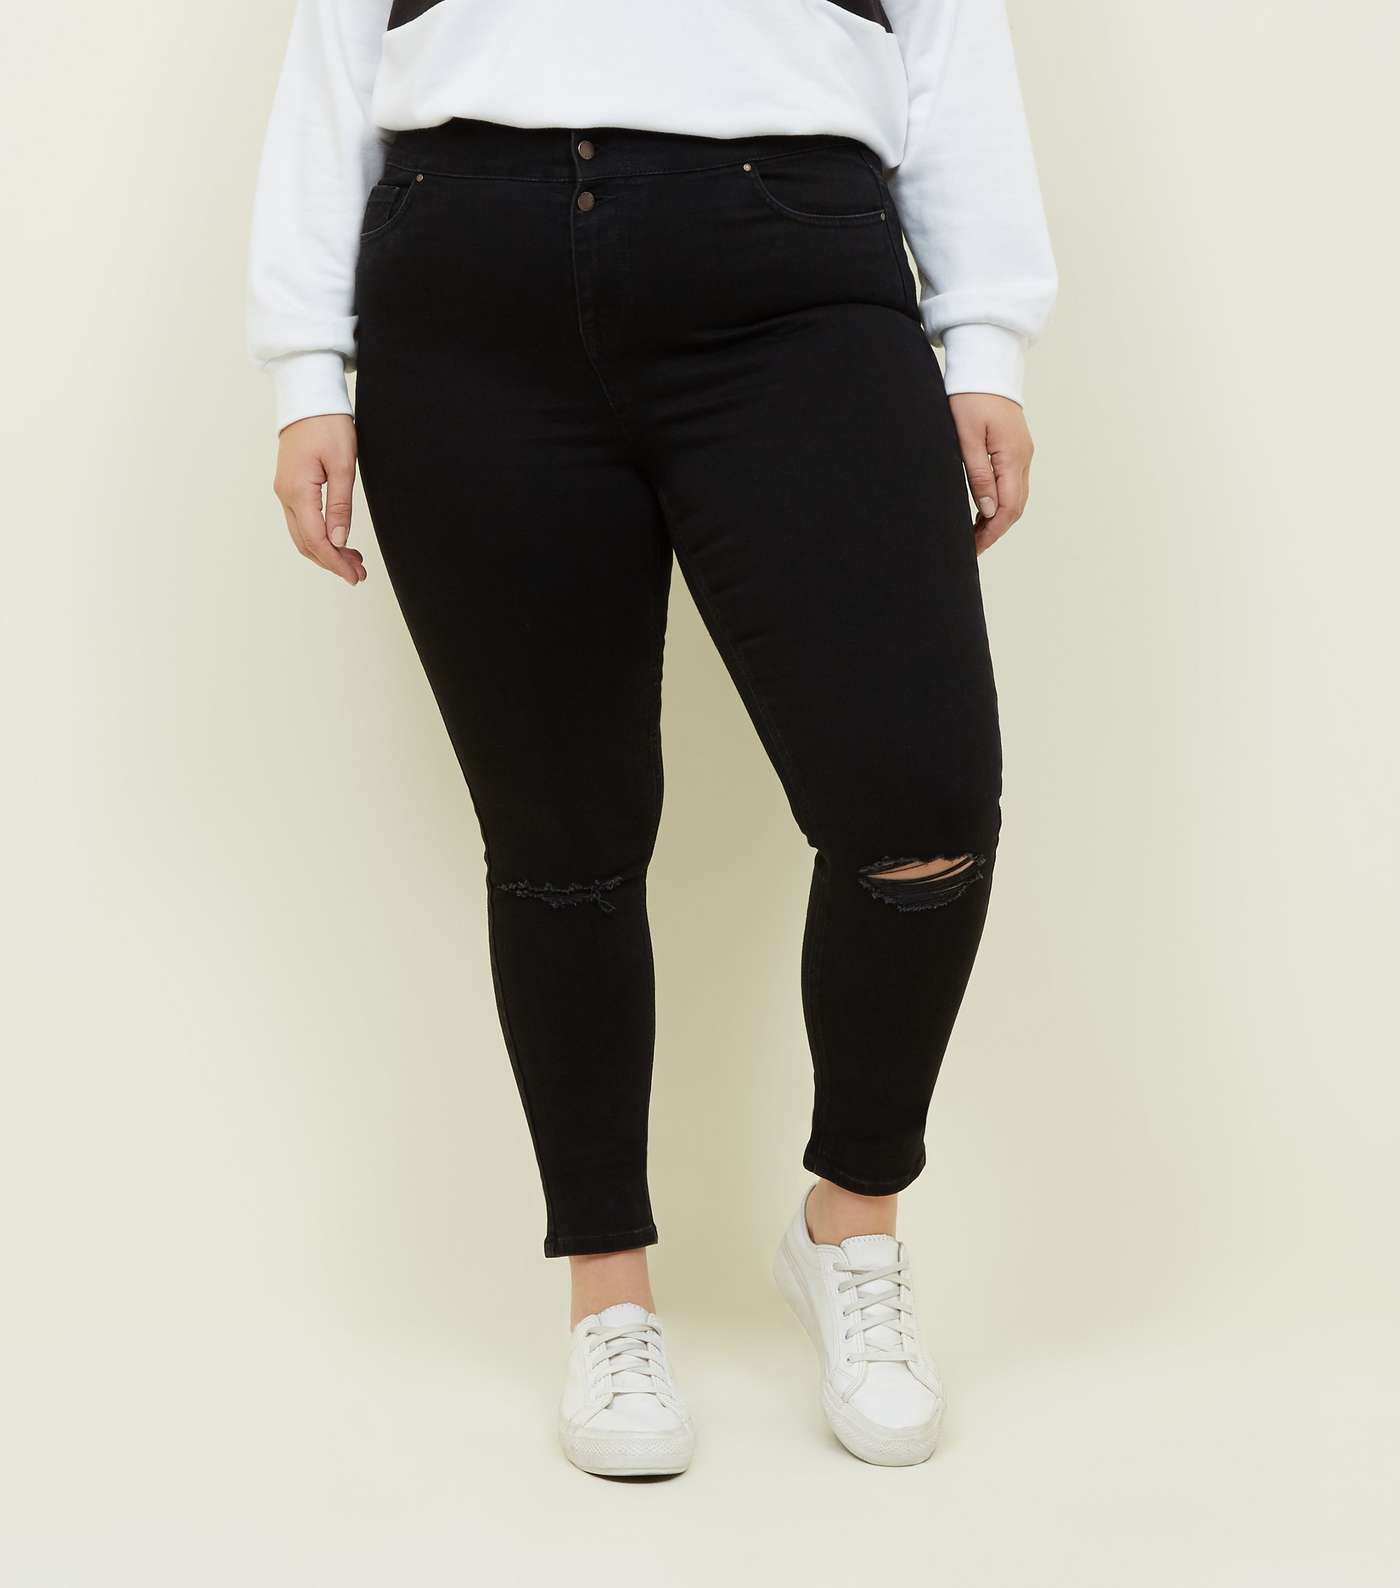 Curves Black High Waist 3 Button Ripped Jeans  Image 2